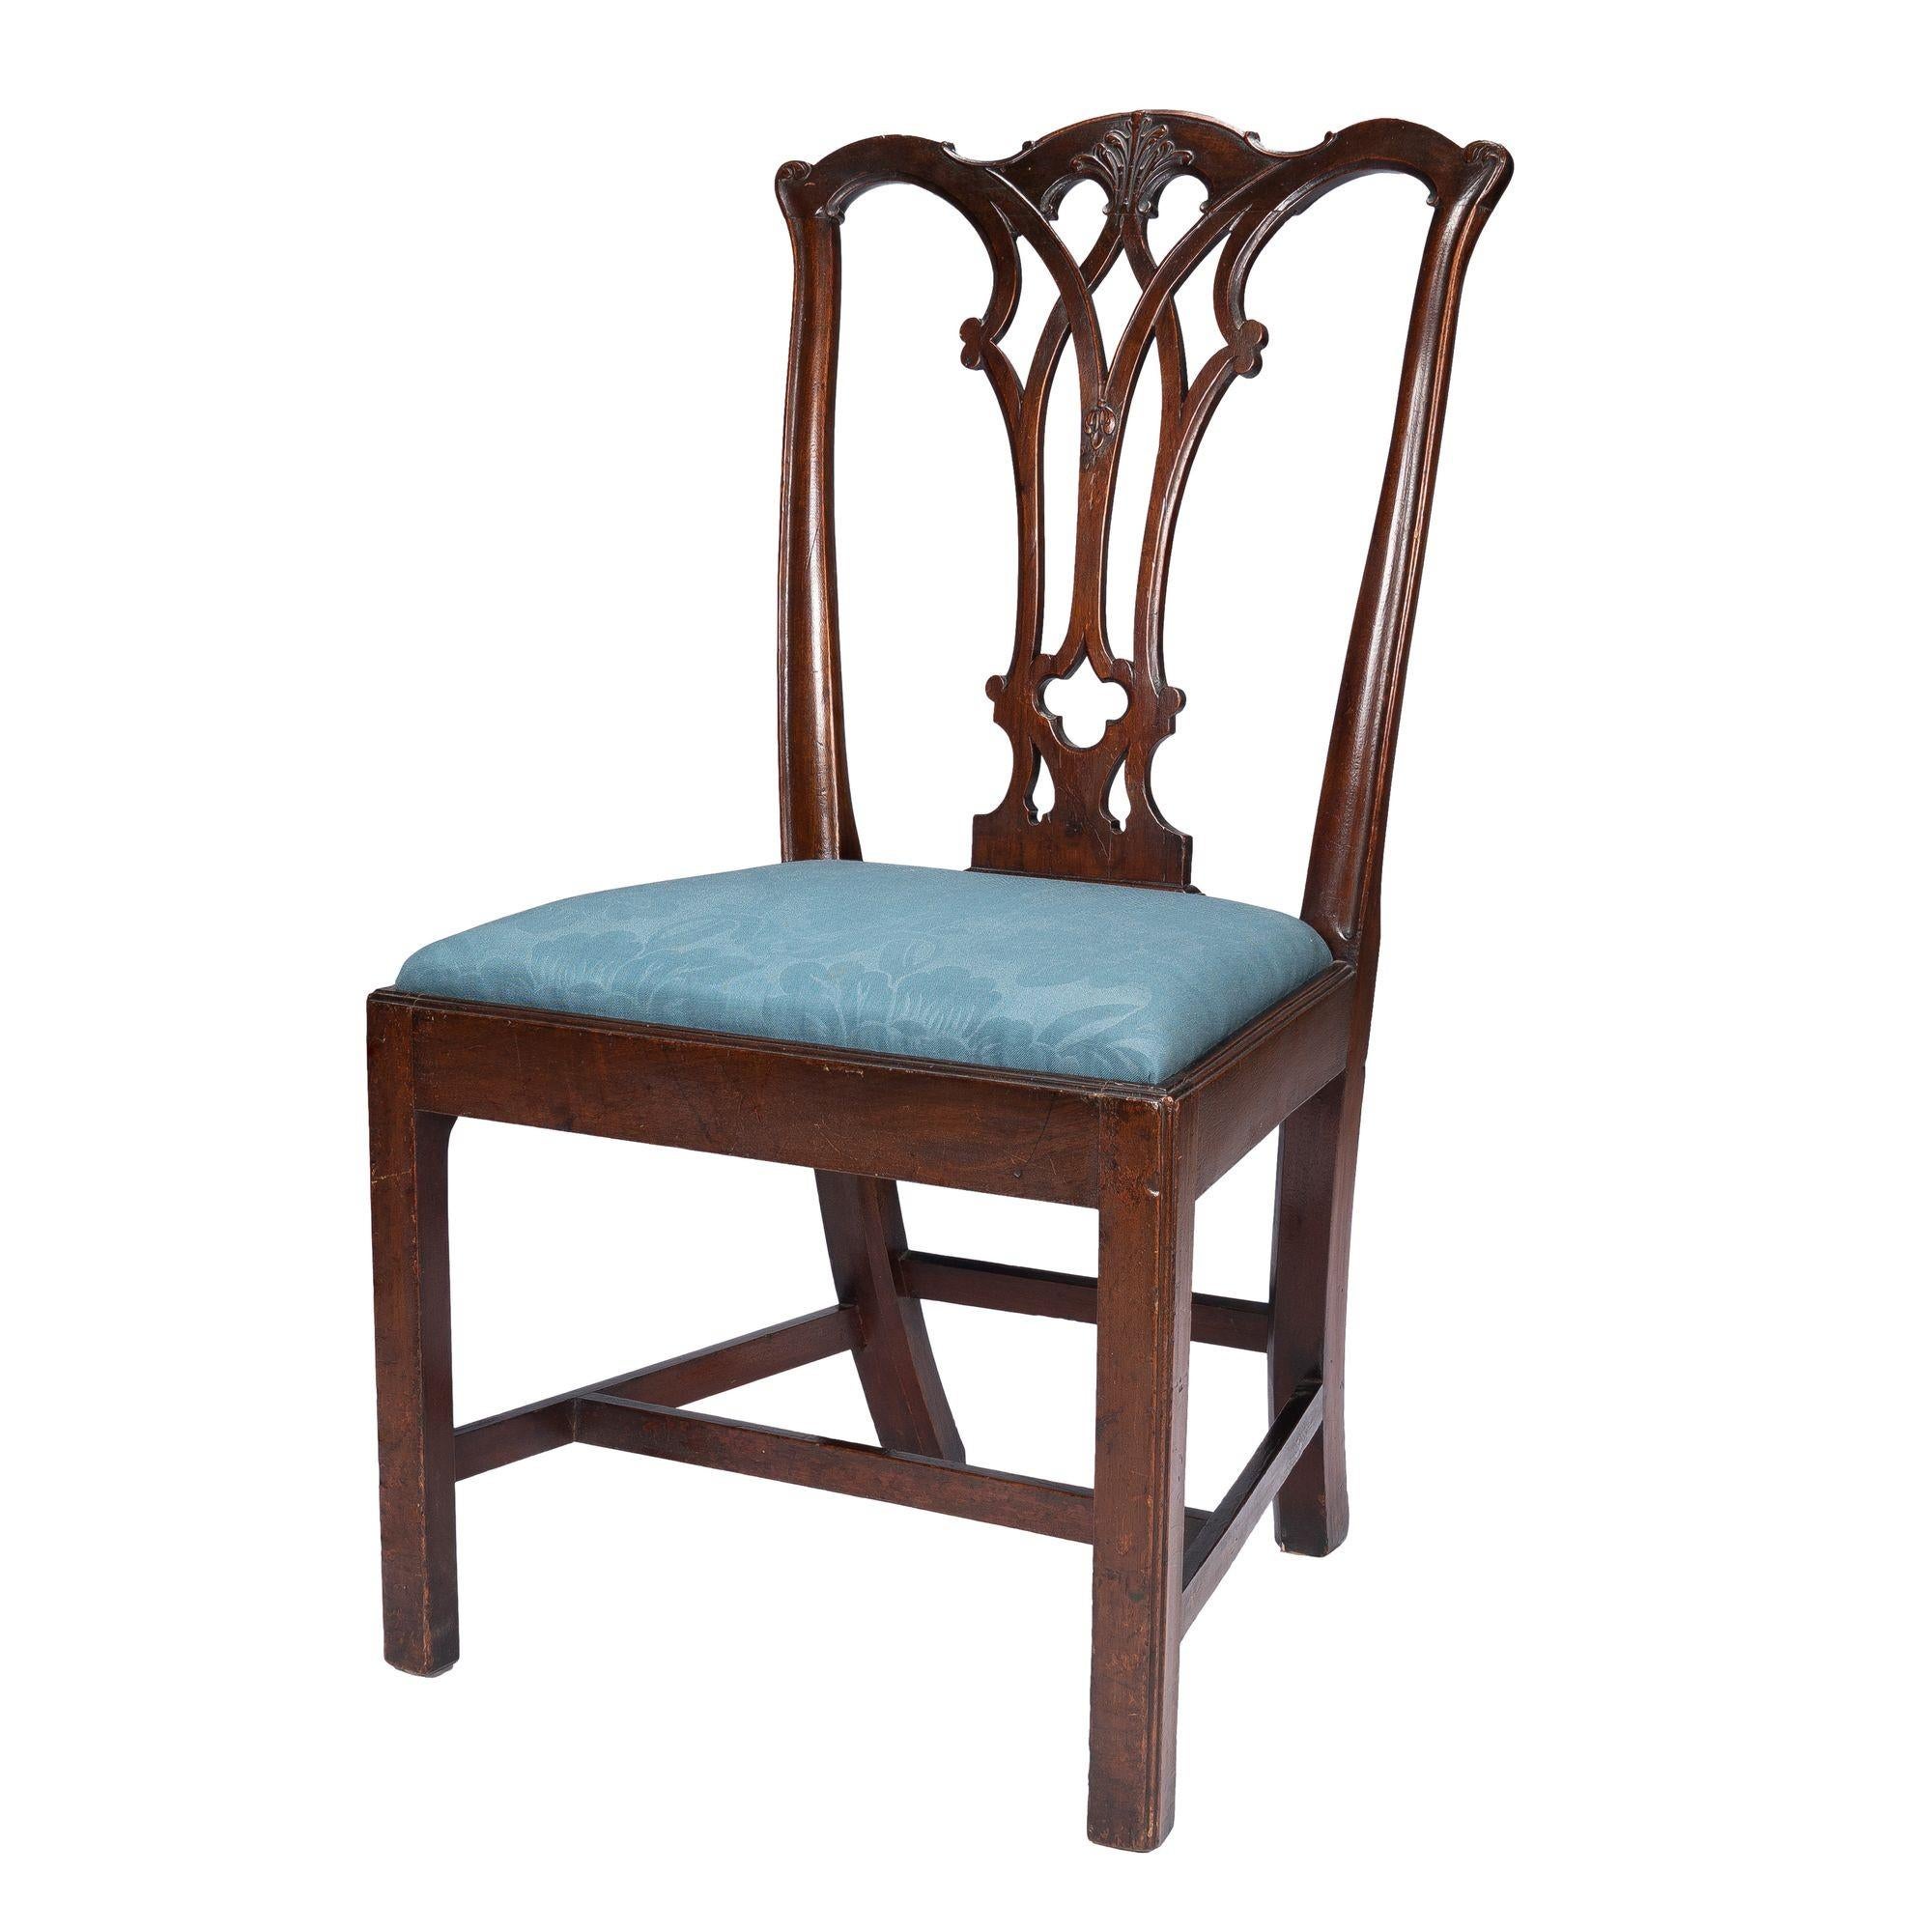 Philadelphia Chippendale mahogany slip seat side chair by Thomas Tuft. The chair crest rail and back splat are carved with rococo detail, and the chair rests on square ended out legs joined by an “H” stretcher. The slip seat has been upholstered in